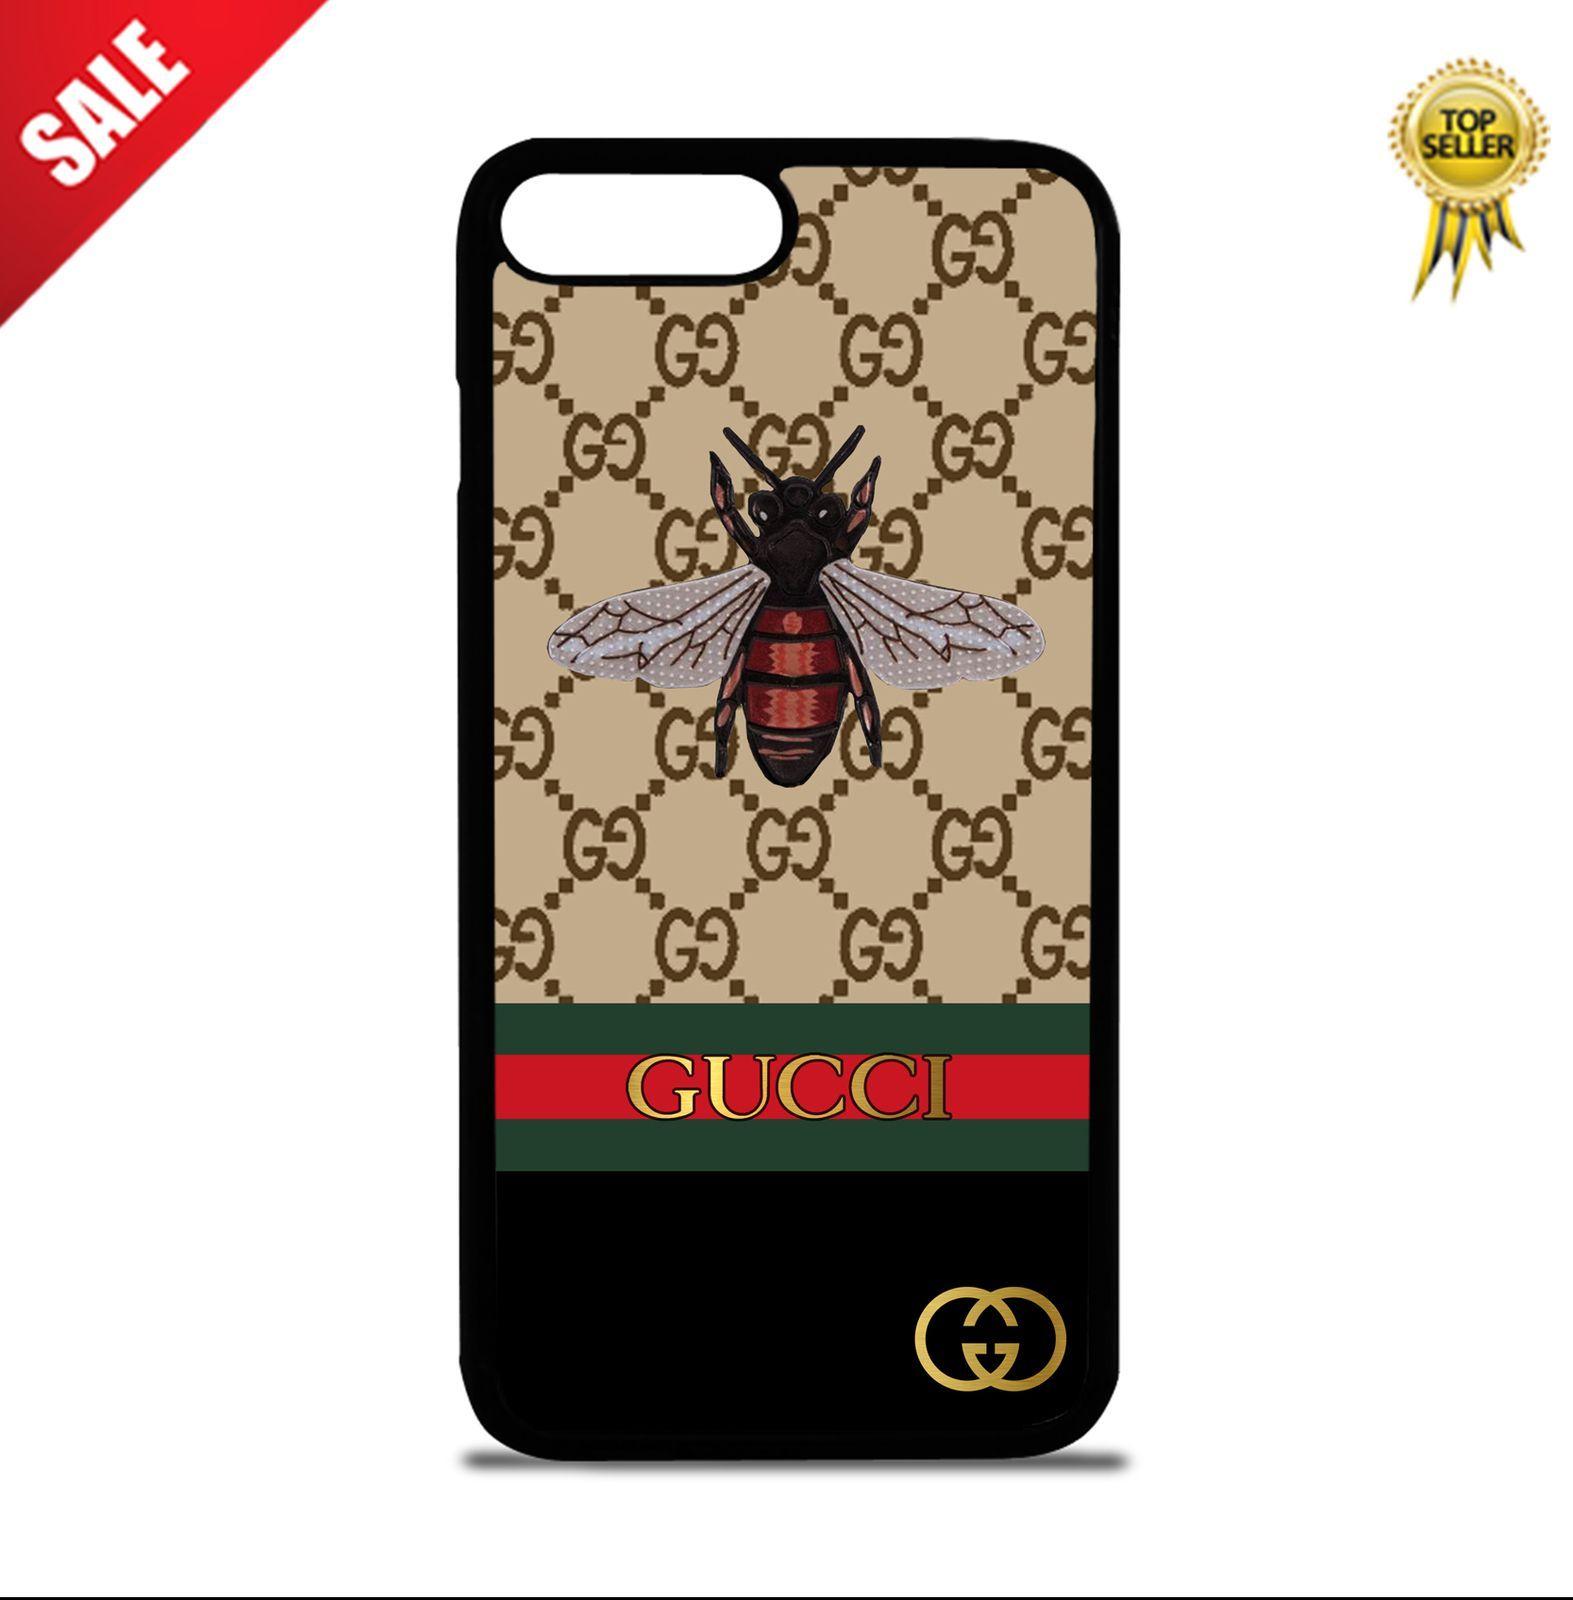 Gucci Bee Logo - Bee Gucci Gold Logo Black Stripe Case For iPhone 5 5s 6 6Plus 7 ...